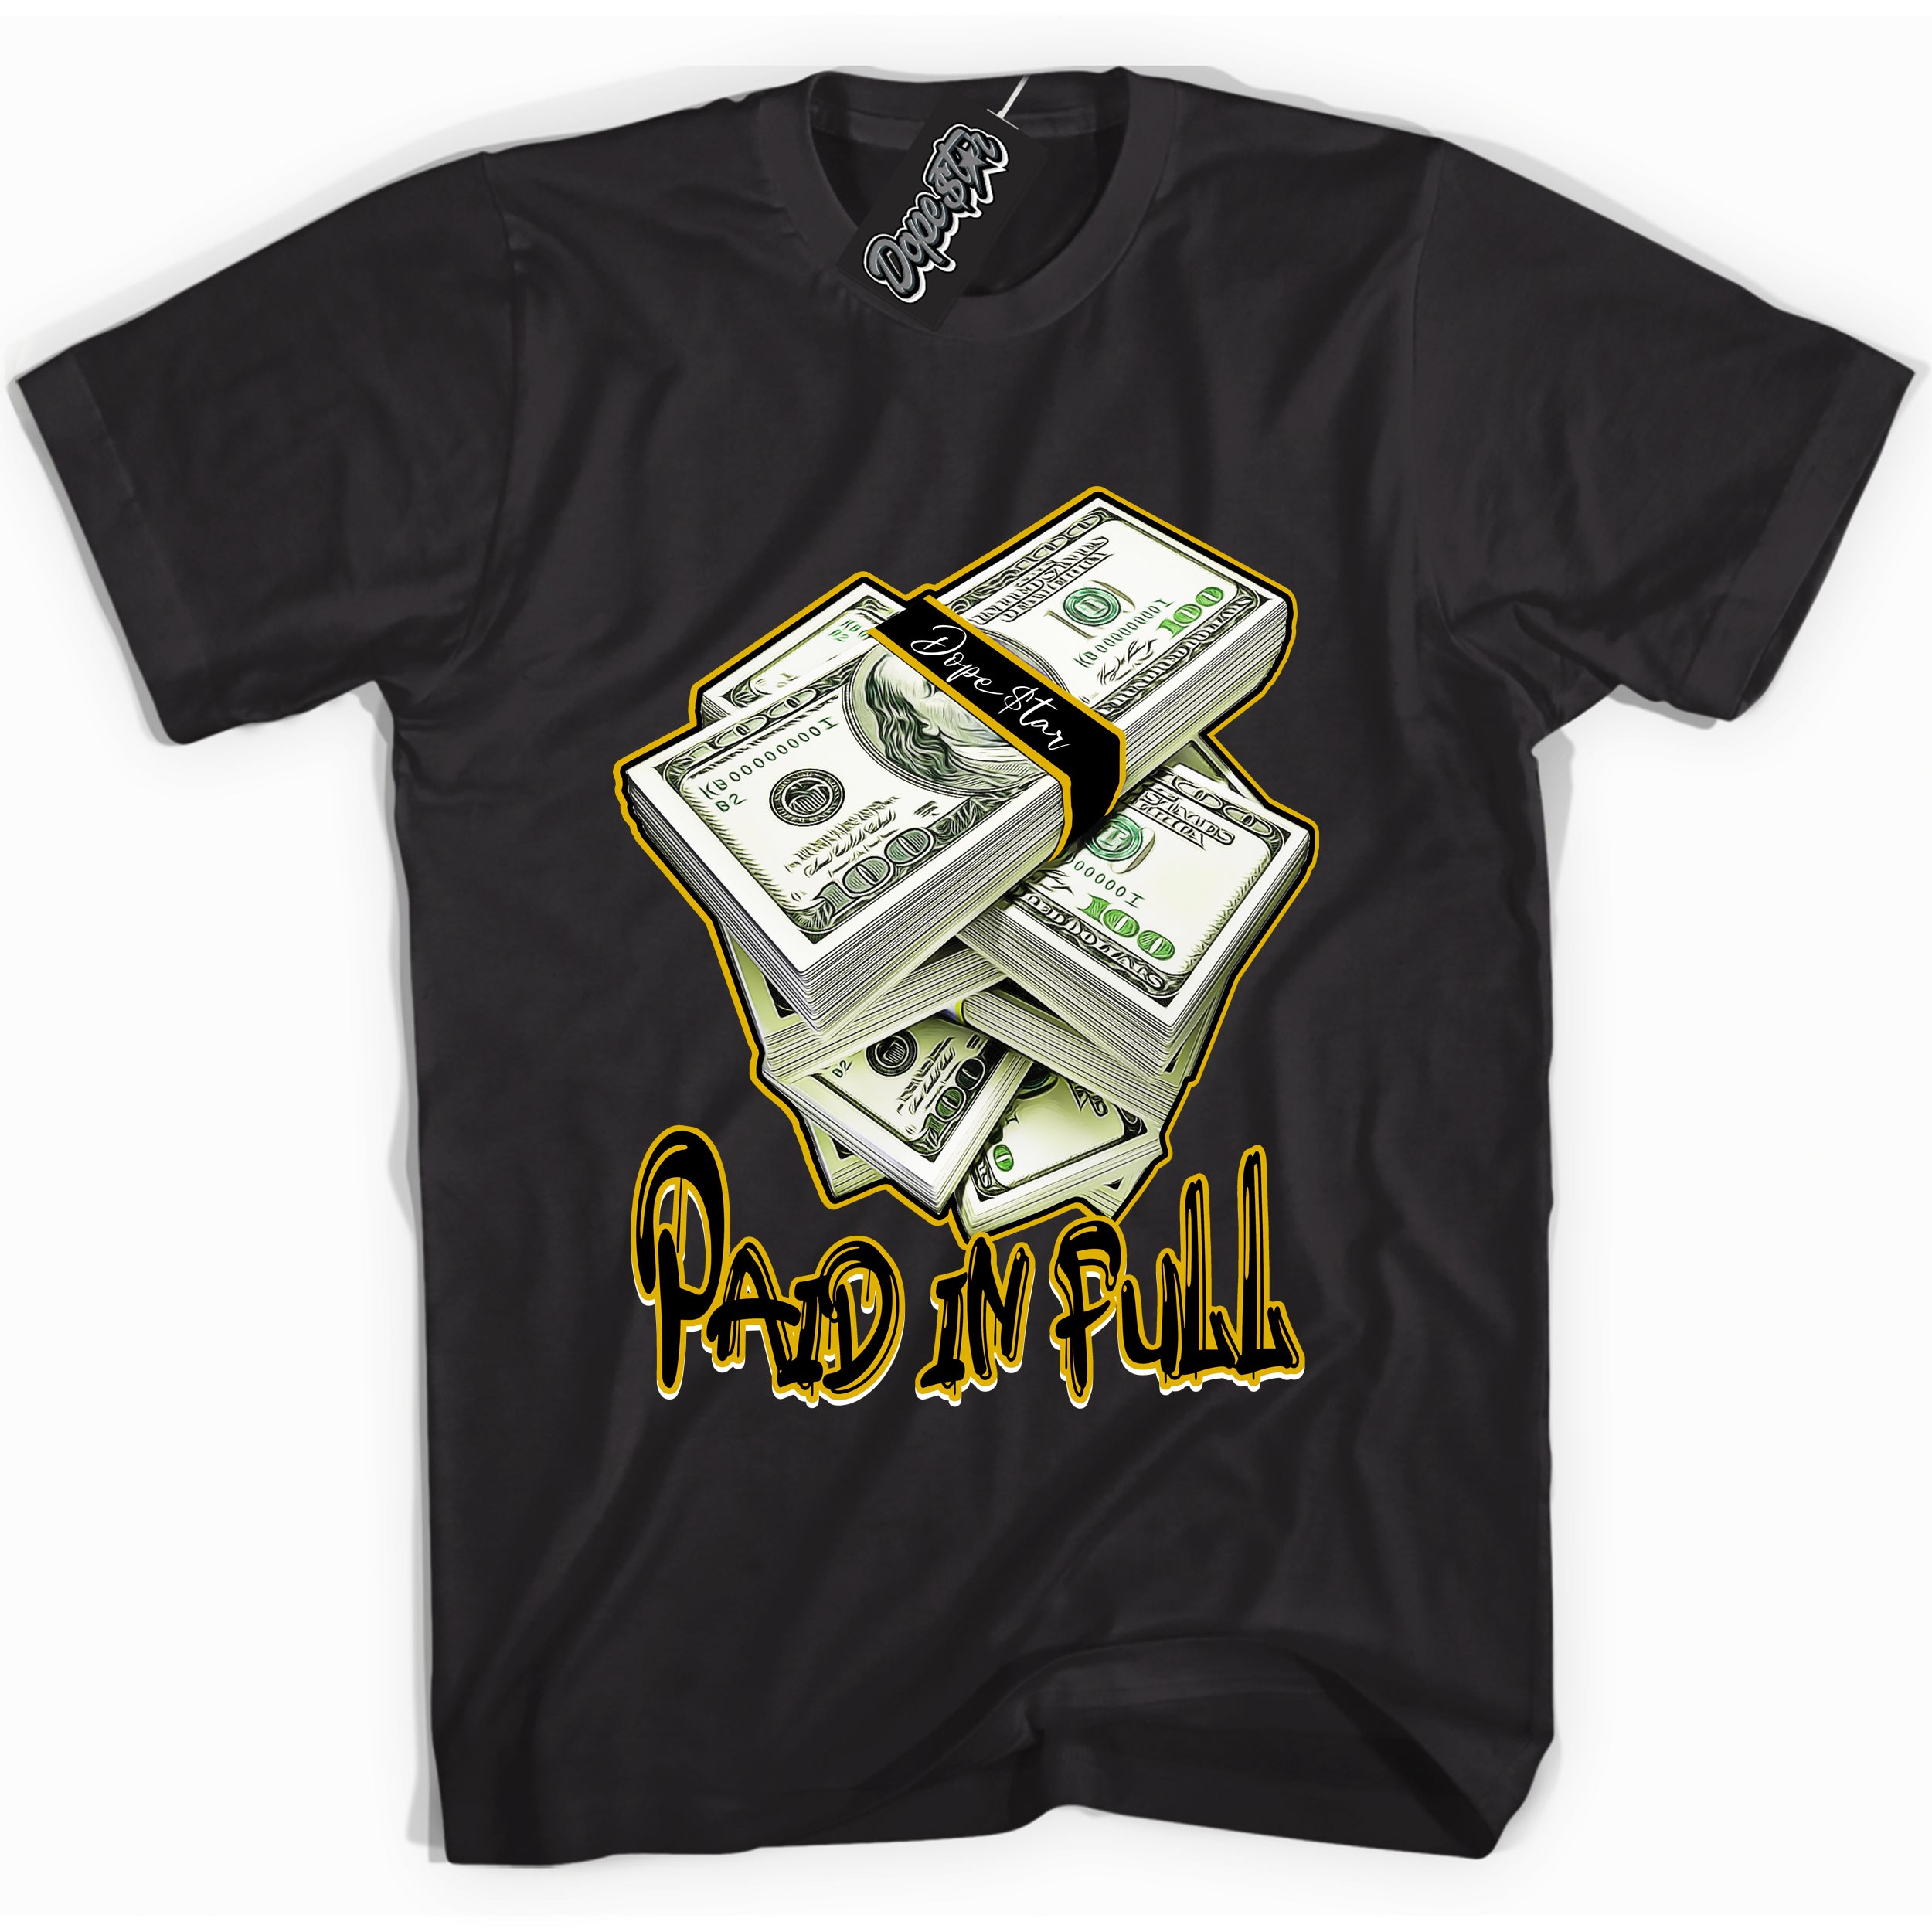 Cool Black Shirt with “ Paid In Full ” design that perfectly matches Yellow Ochre 6s Sneakers.